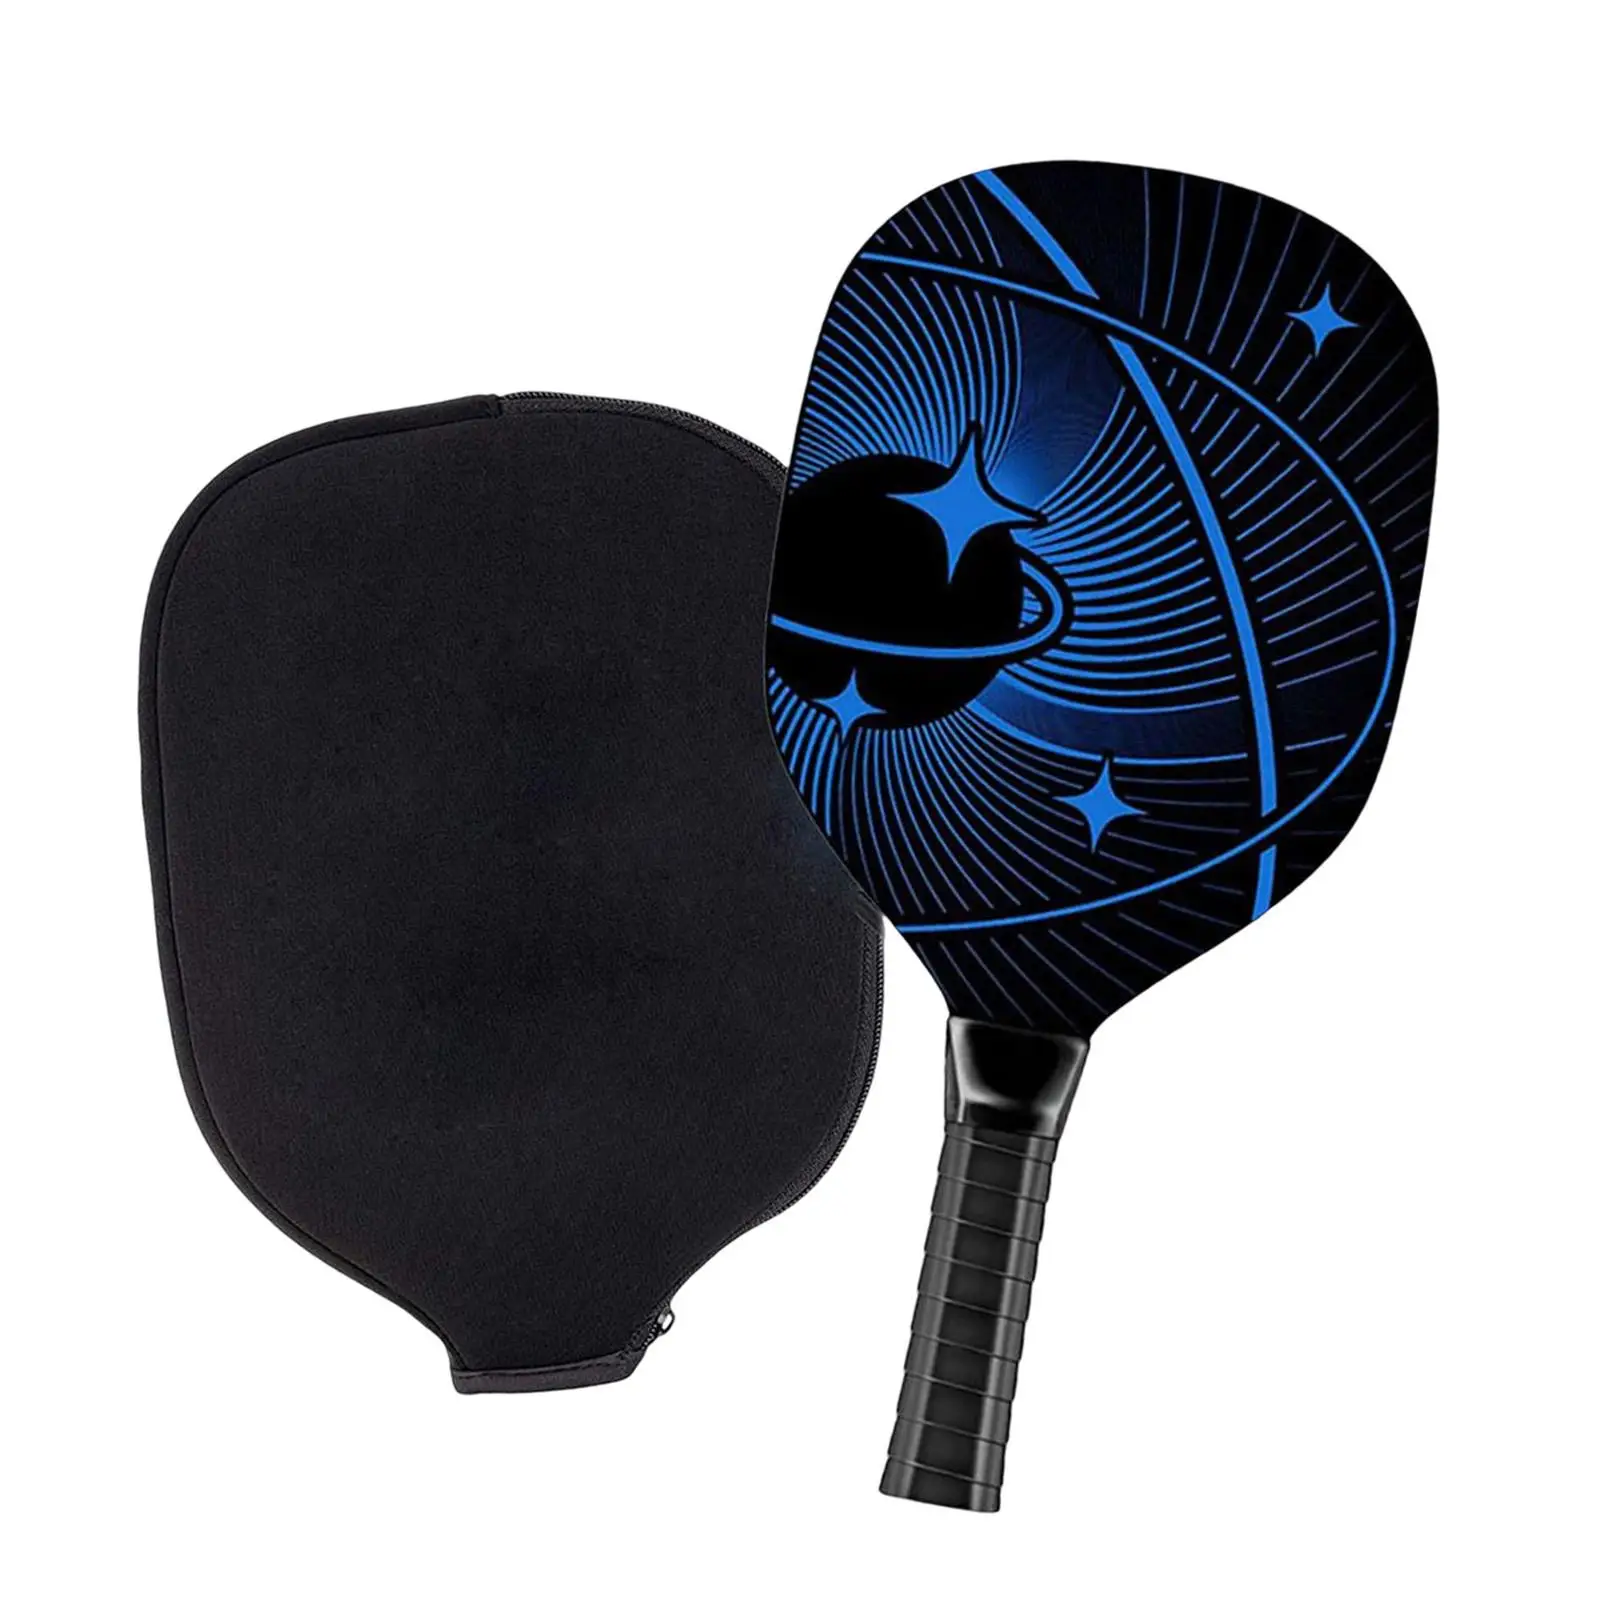 Pickleball Paddle Professional High End Premium Nonslip Grip with Cover for Kids Adults Men Women Beginners Advanced Tournament